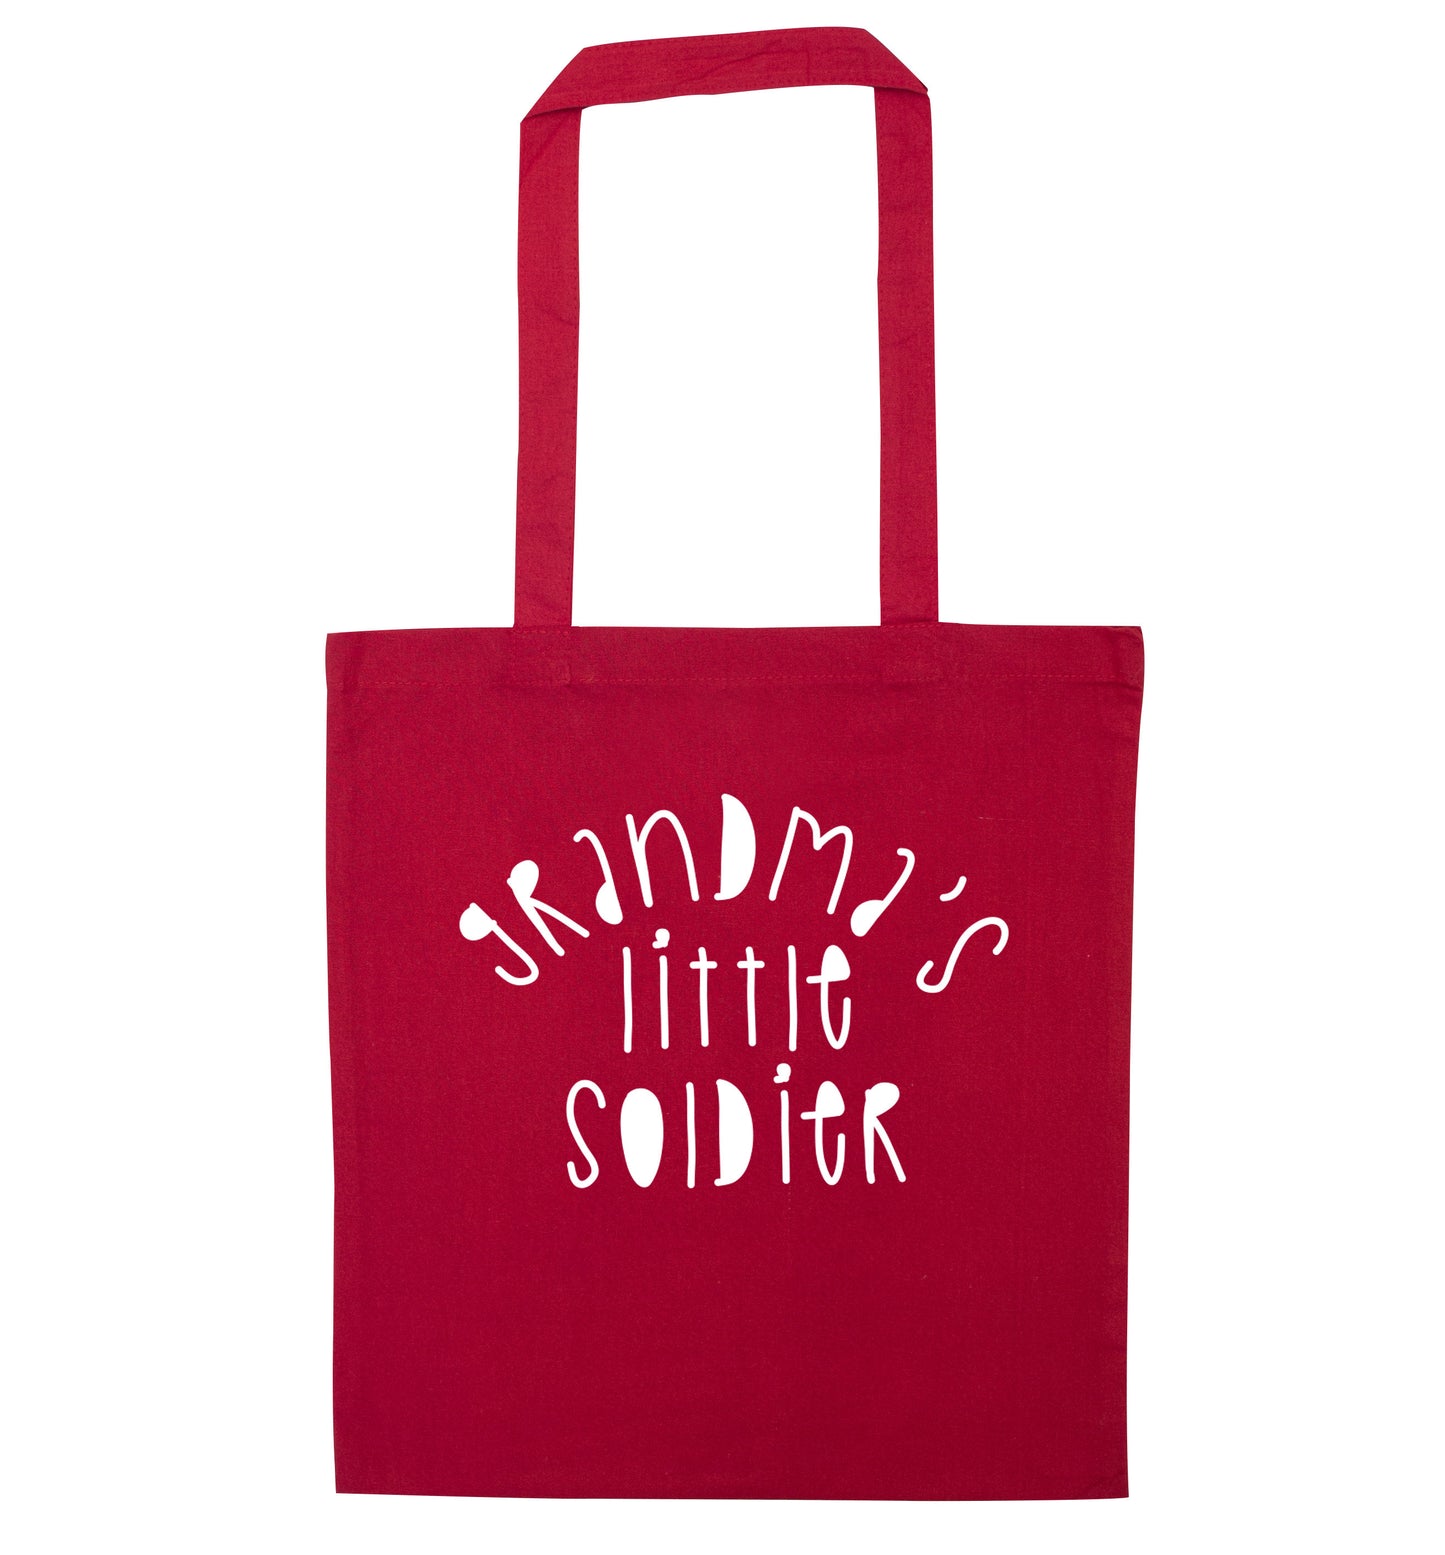 Grandma's little soldier red tote bag